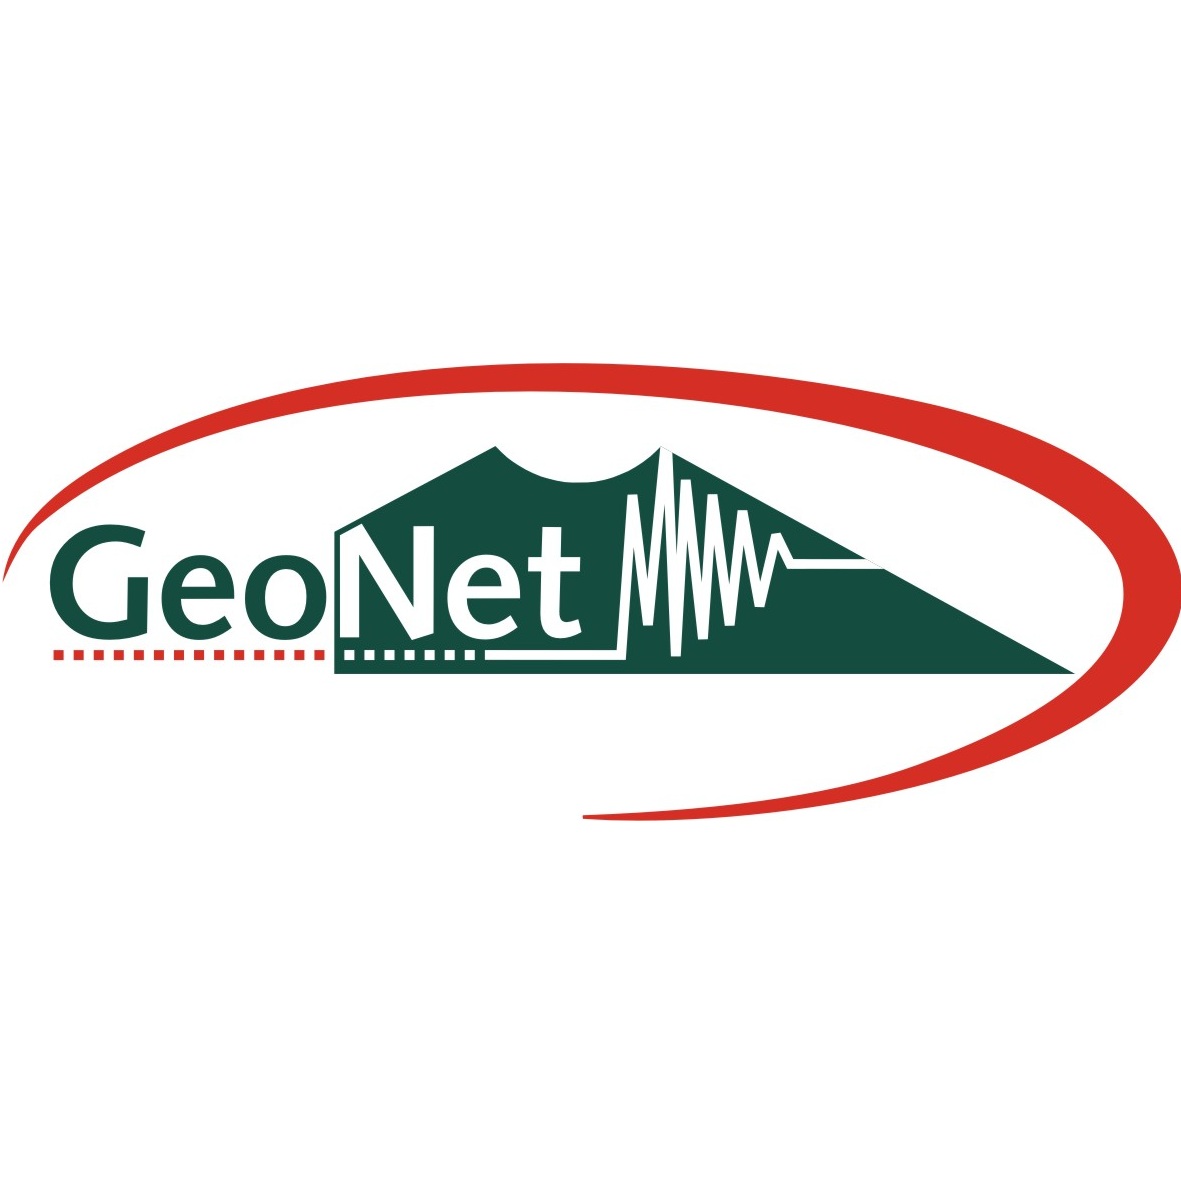 GeoNet Quakes - Severe and above